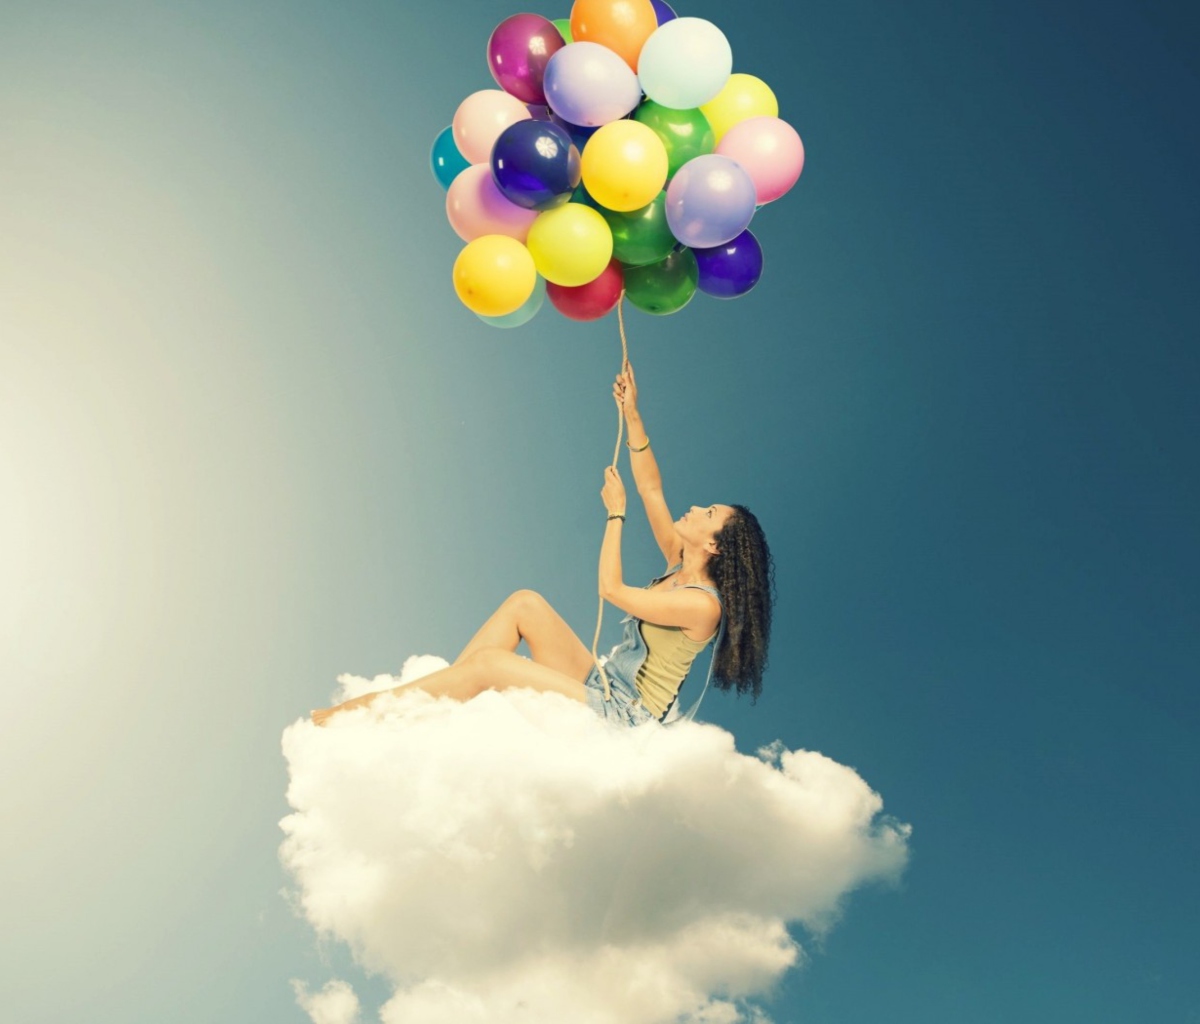 Flyin High On Cloud With Balloons wallpaper 1200x1024